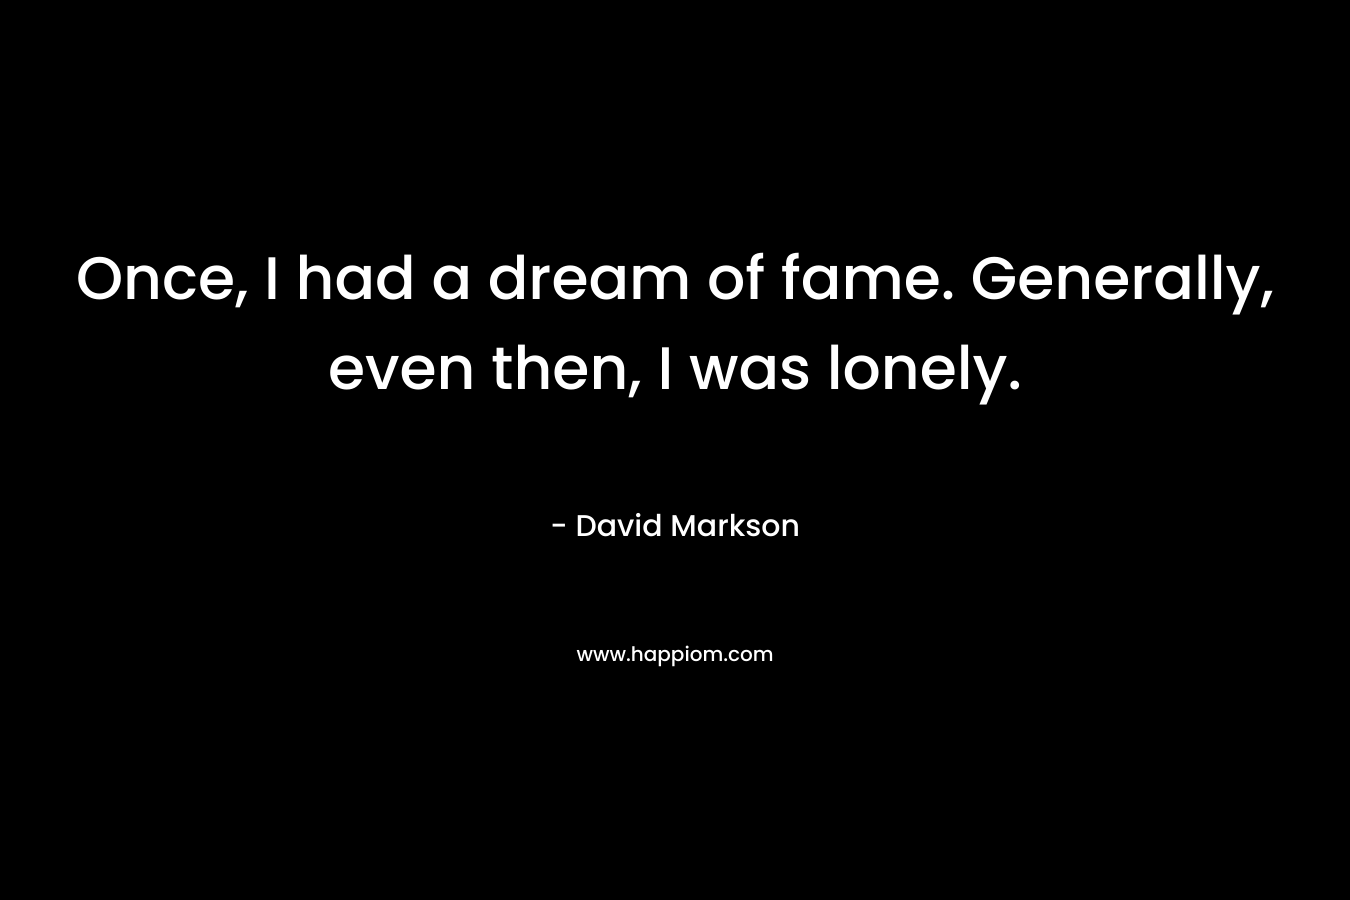 Once, I had a dream of fame. Generally, even then, I was lonely.